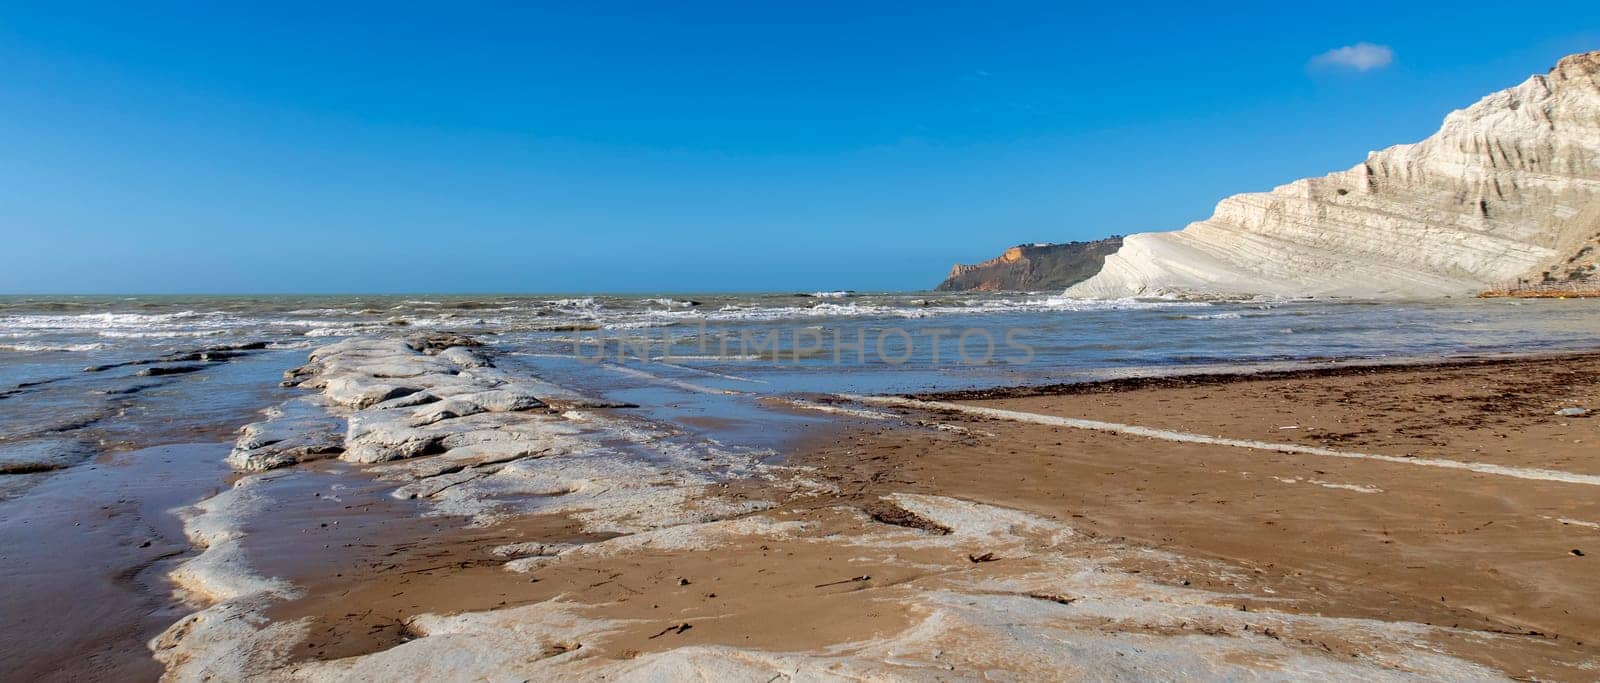 View of the limestone white cliffs with the beach at Stair of the Turks or Turkish Steps near Realmonte in Agrigento province. Sicily, Italy